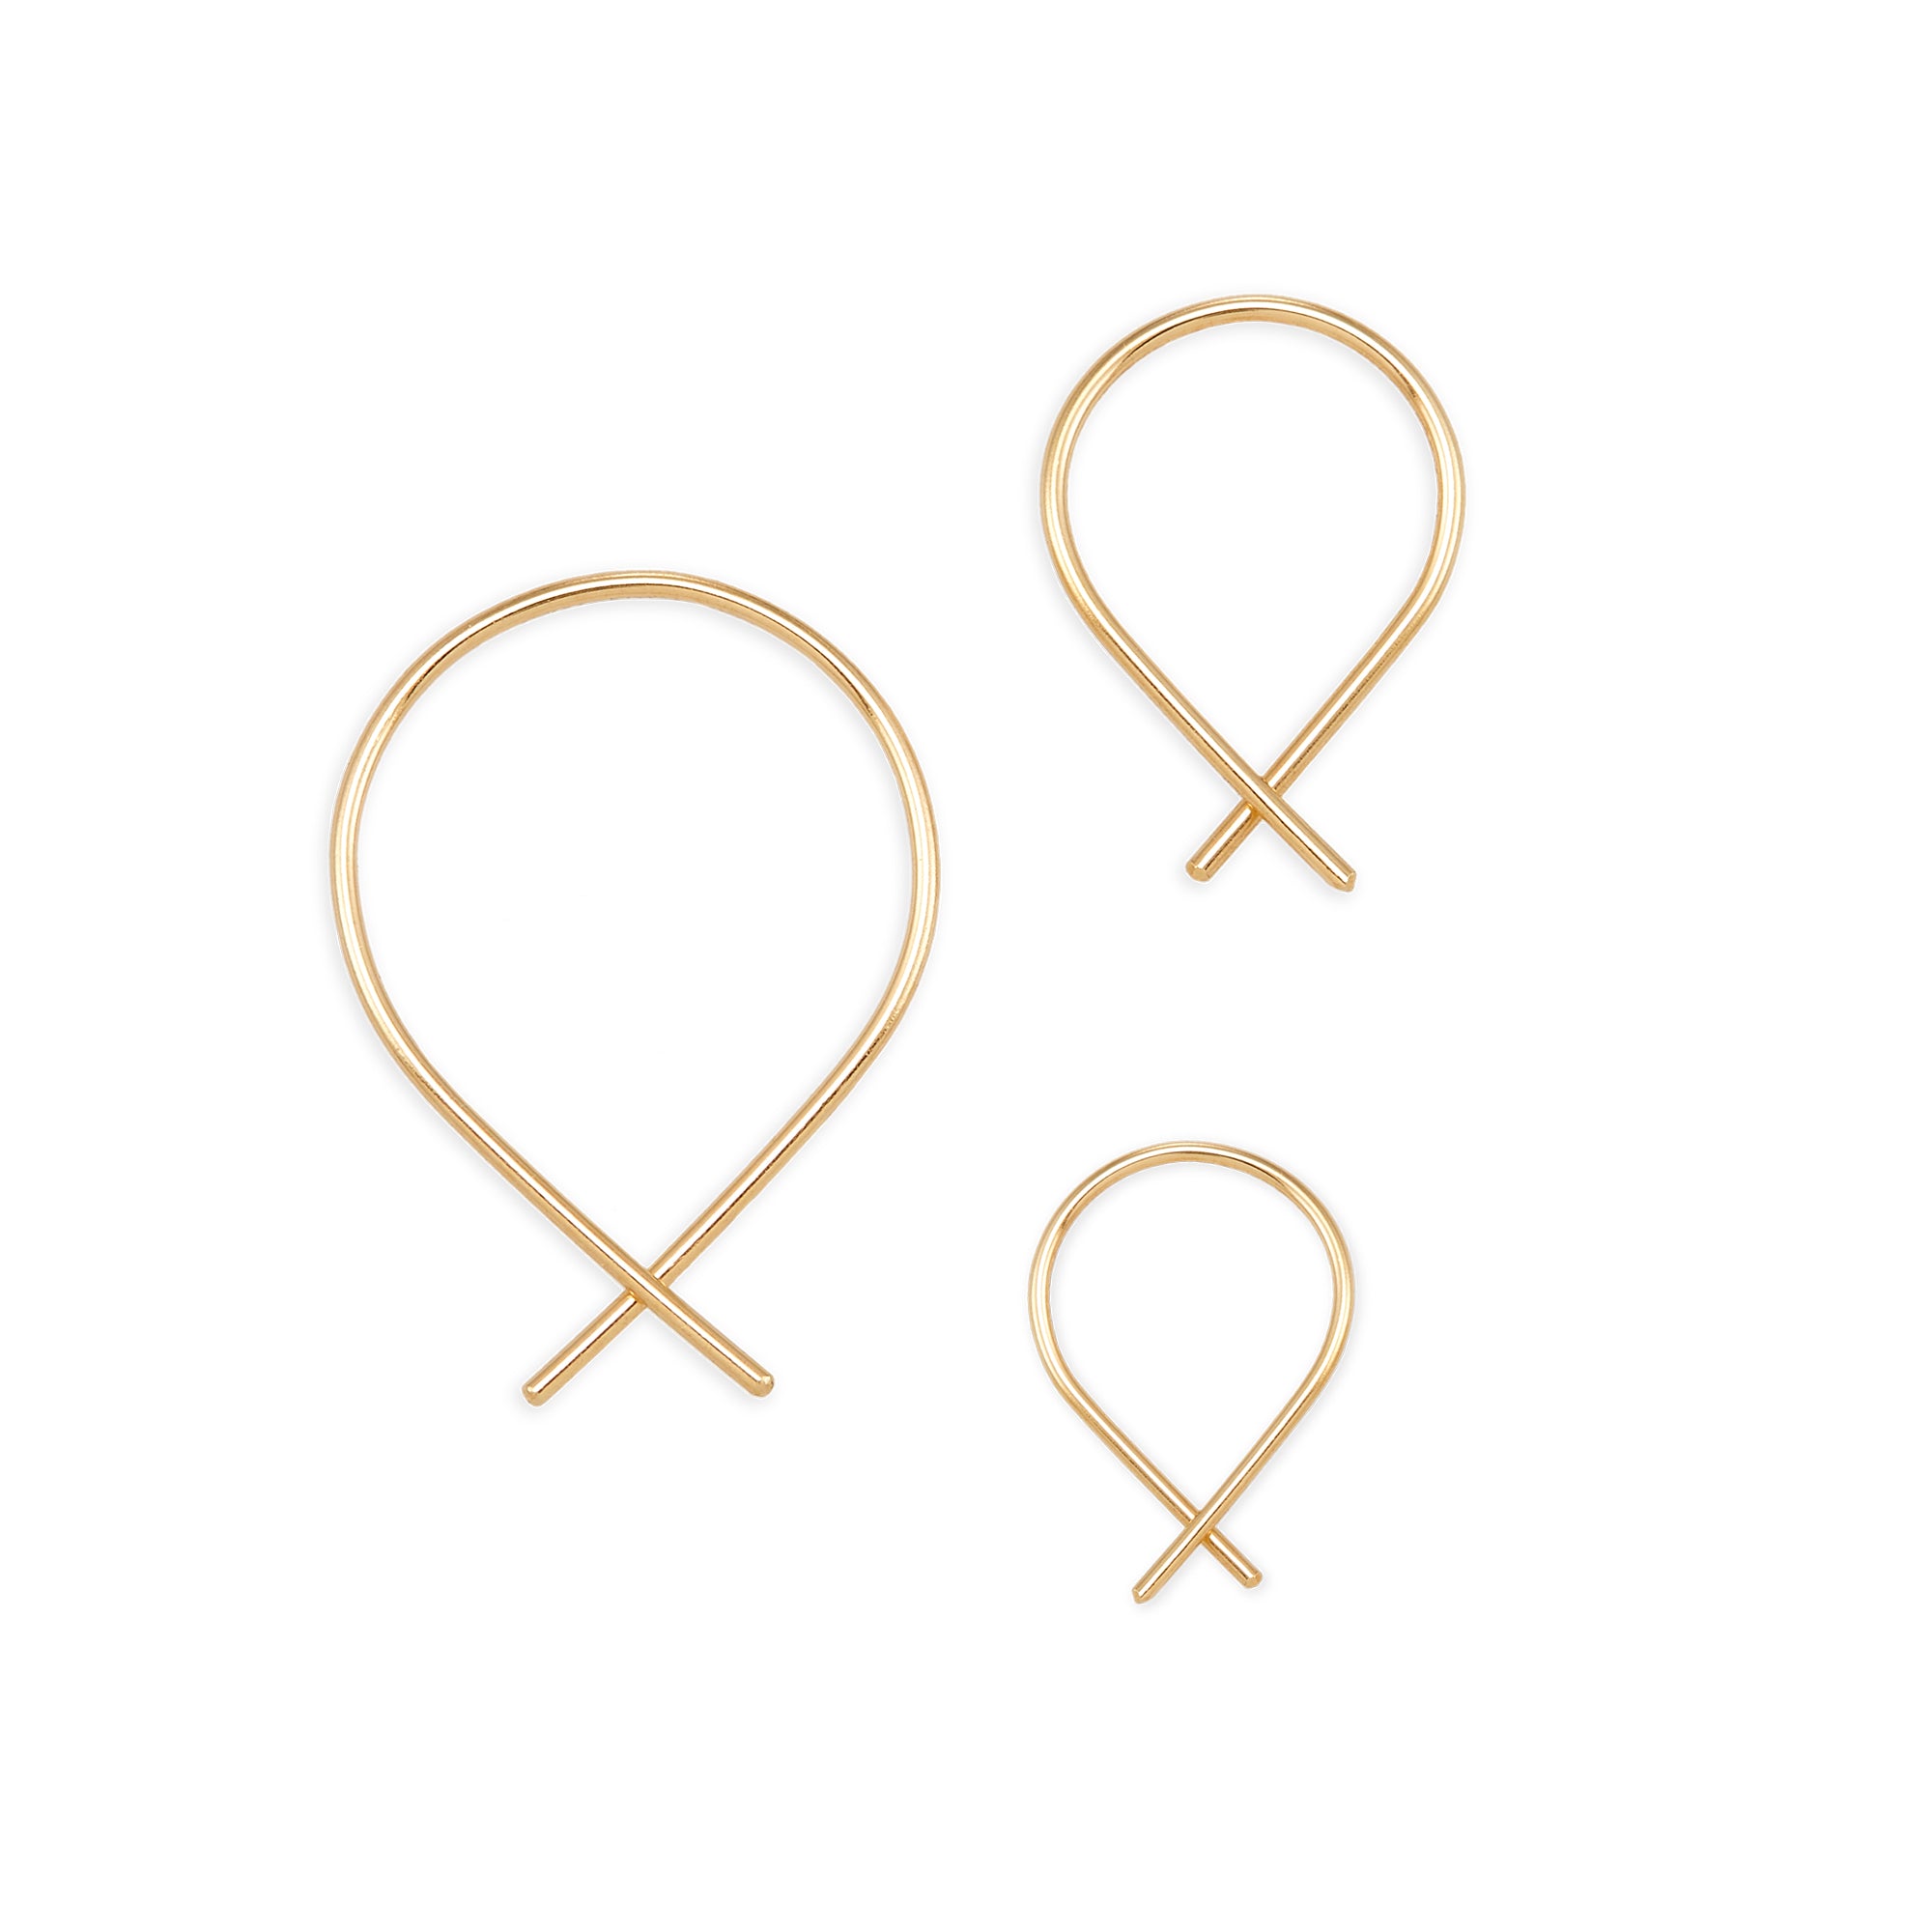 With their casual vibe and unique design, our 14k gold Goldfish Earrings are the perfect modern alternative to the hoop.